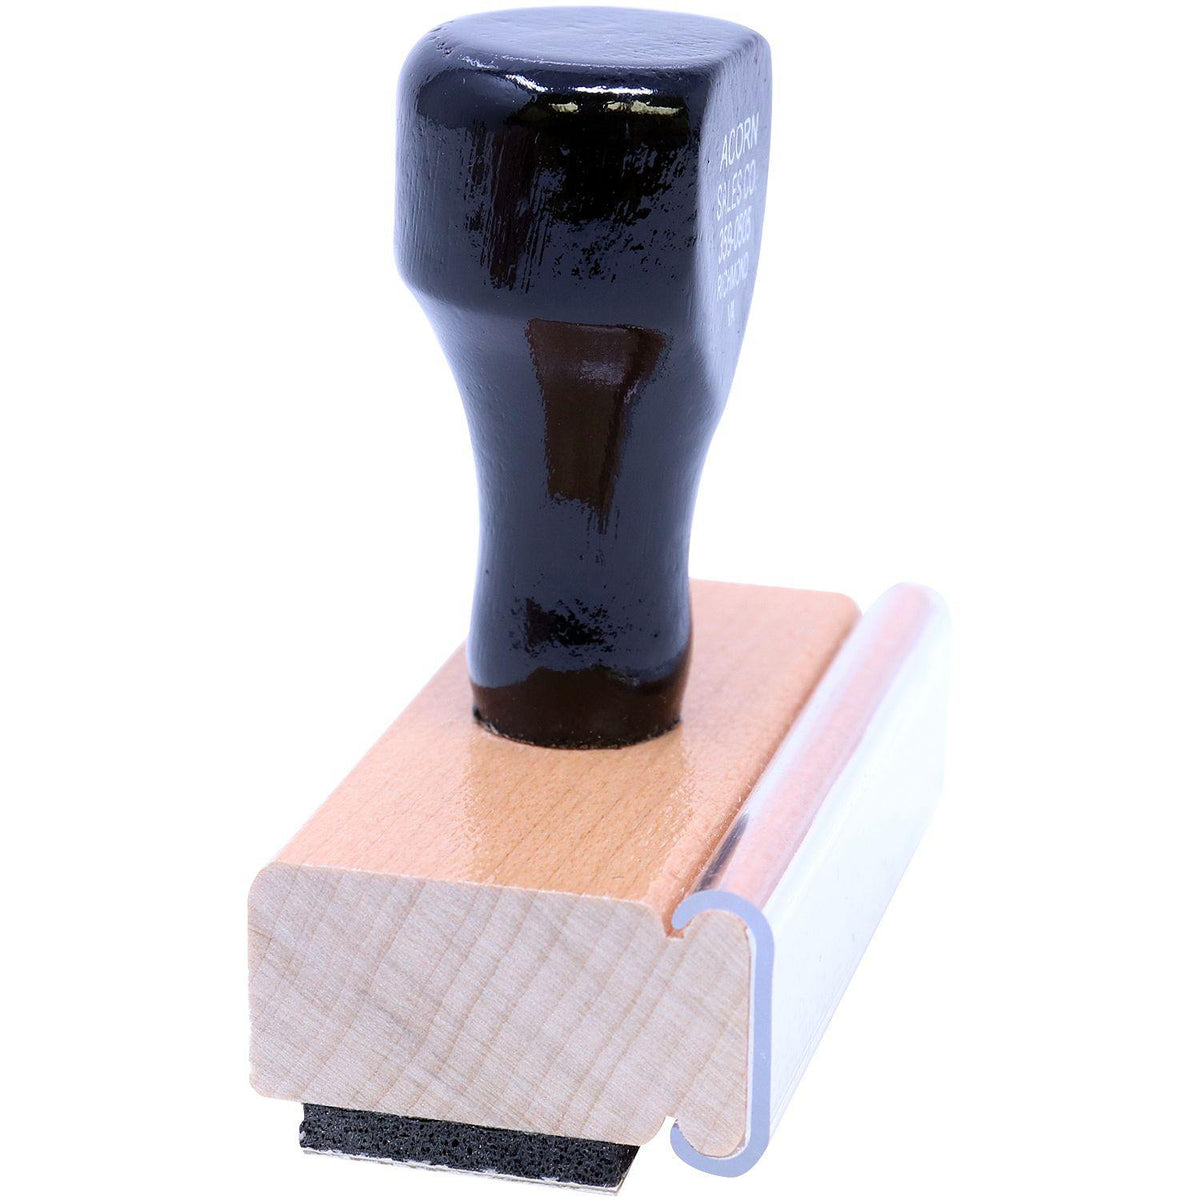 Side View of Cleaned and Sanitized Rubber Stamp at an Angle